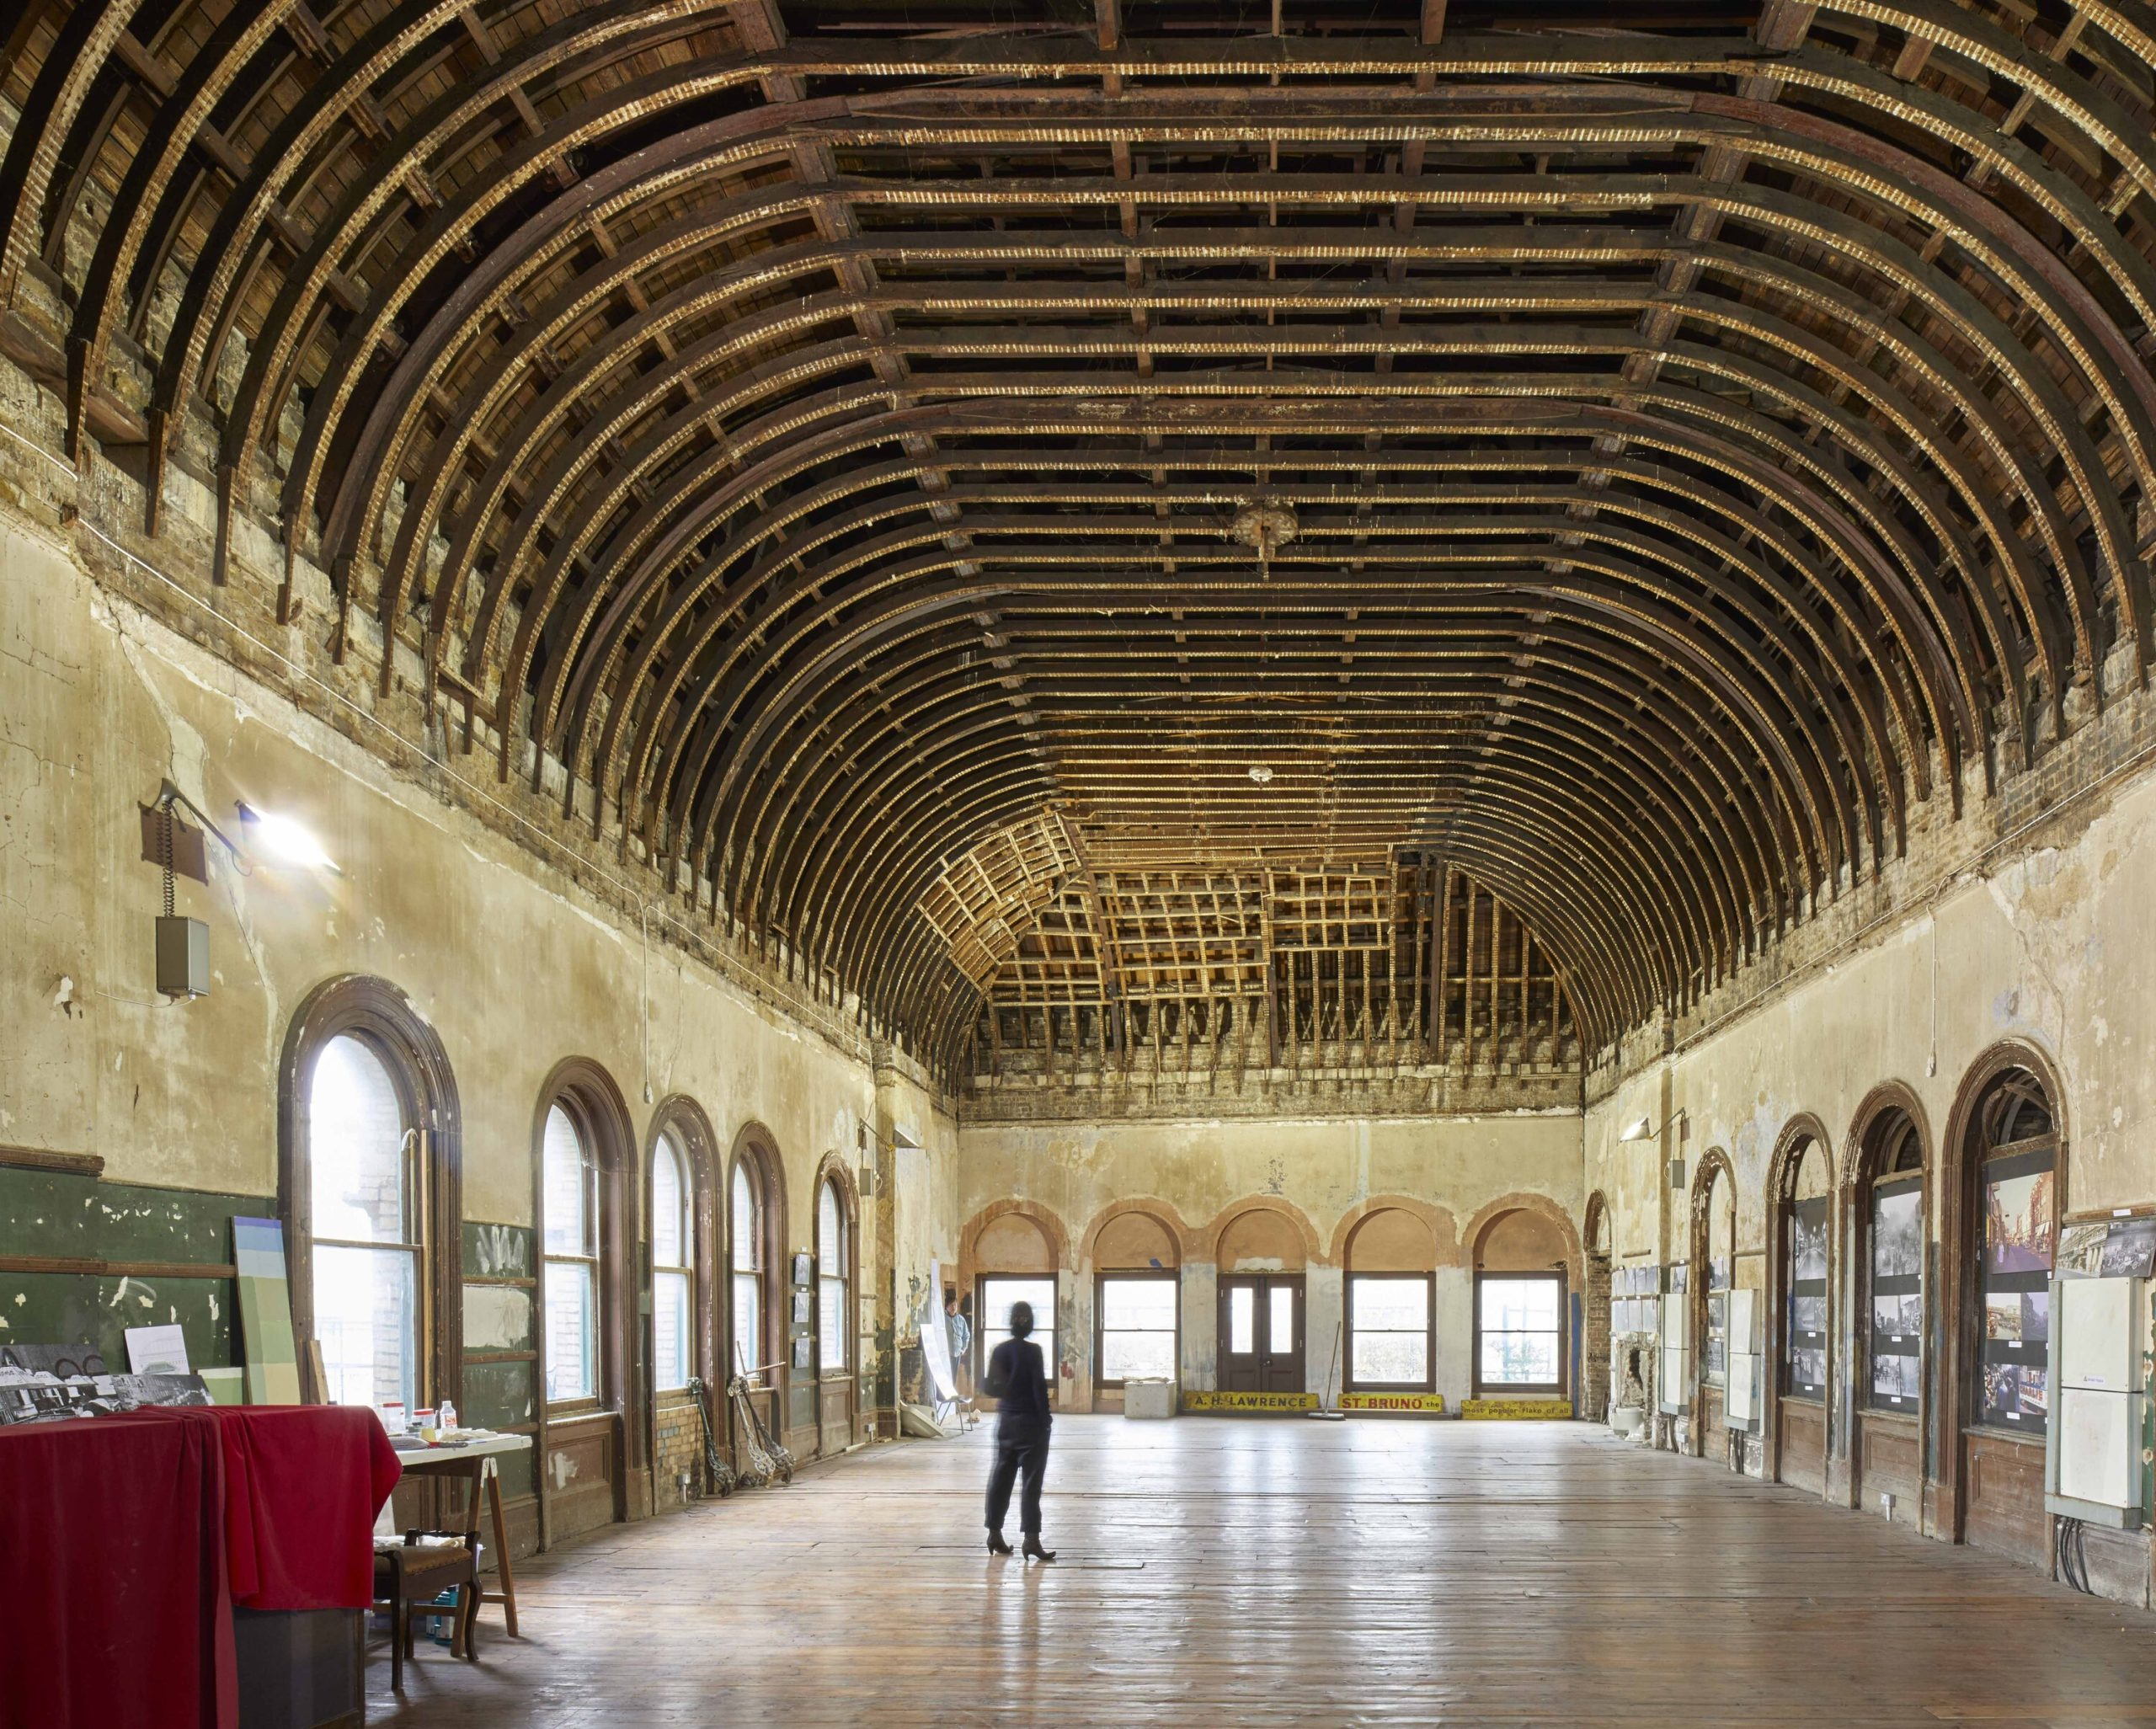 peckham-rye-station’s-long-lost-waiting-room-is-reopening-this-may